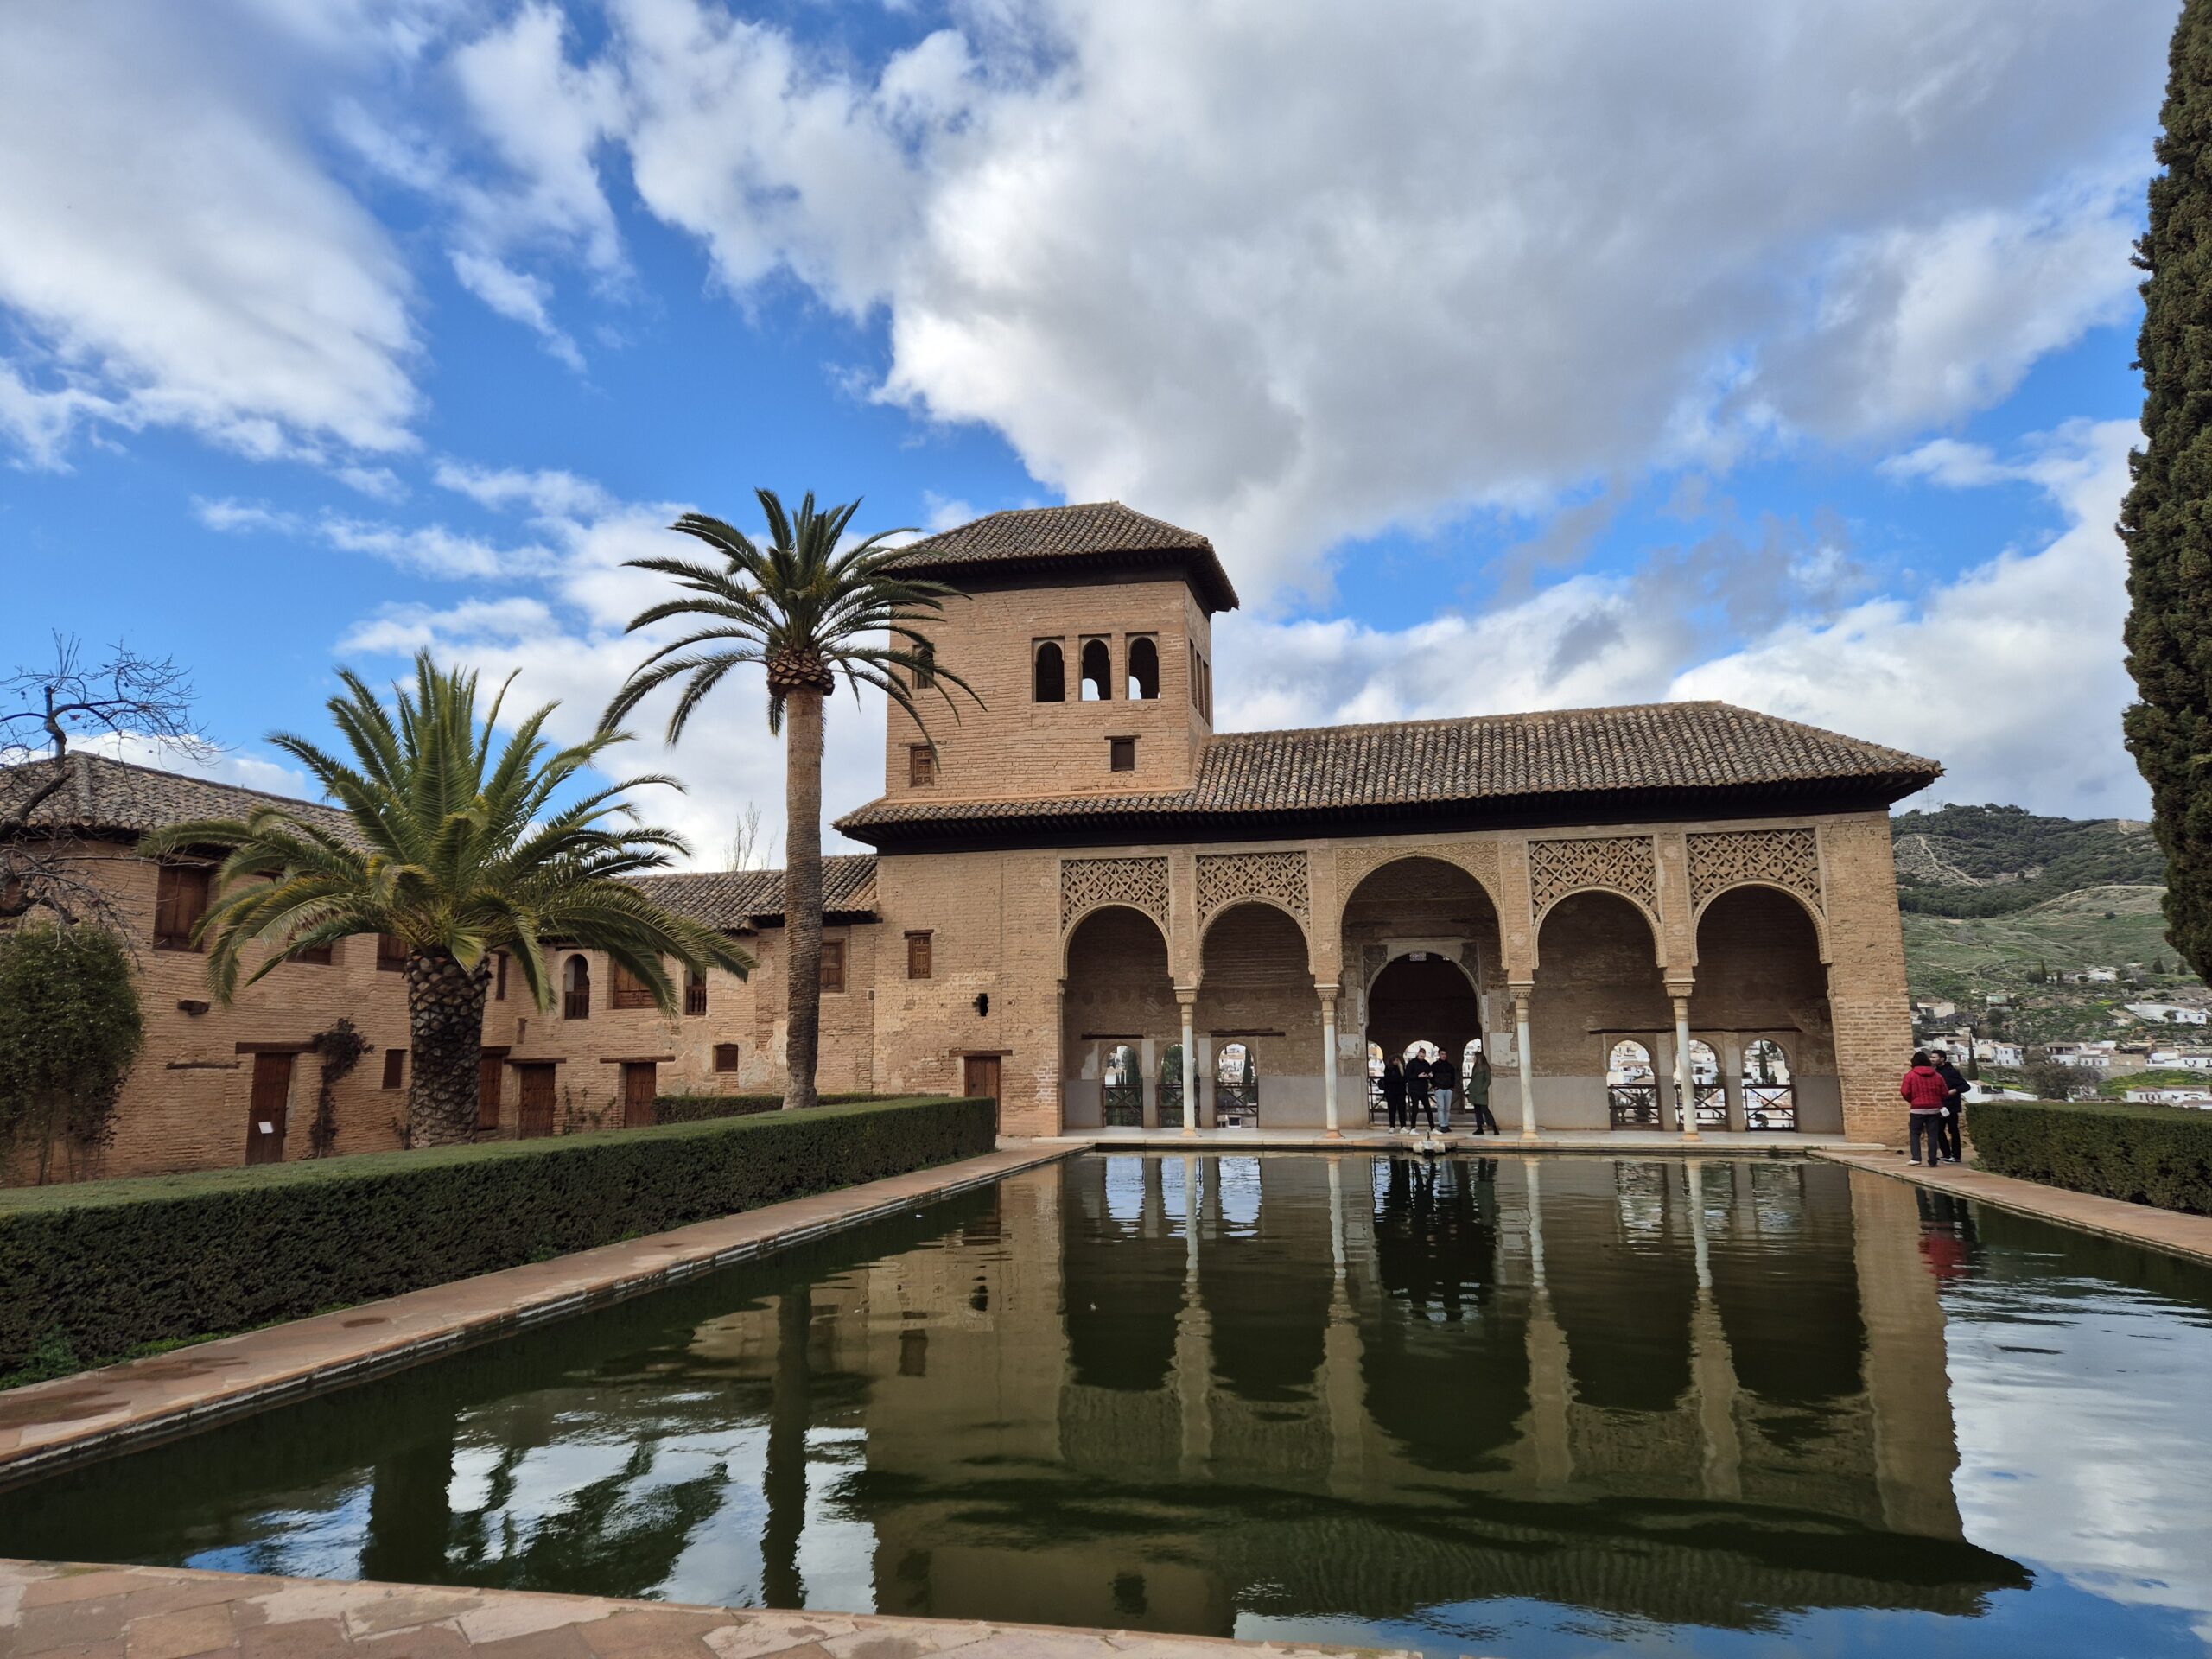 Partal Palace is a palatial structure inside the Alhambra fortress complex located in Granada, Spain.